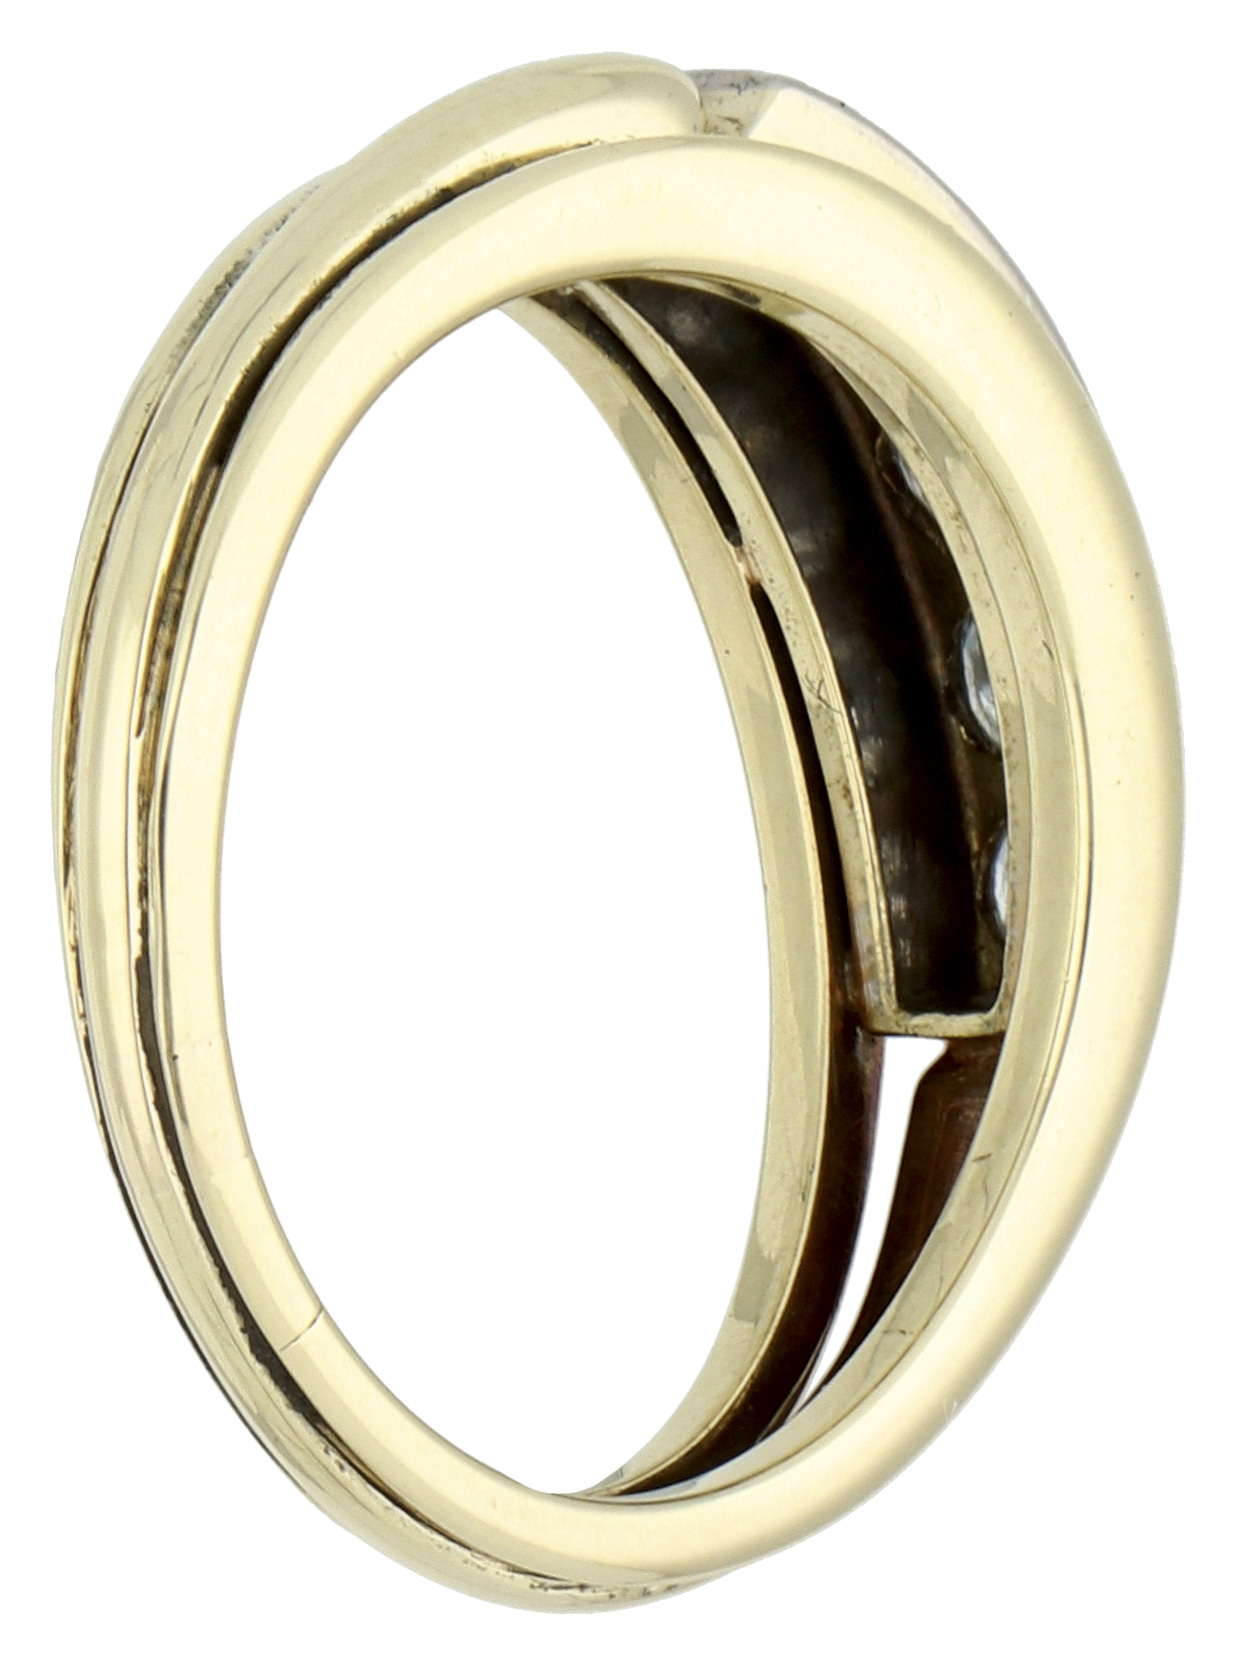 No Reserve - 14K Yellow gold demi-alliance ring set with approx. 0.48 ct. diamond. - Image 2 of 3